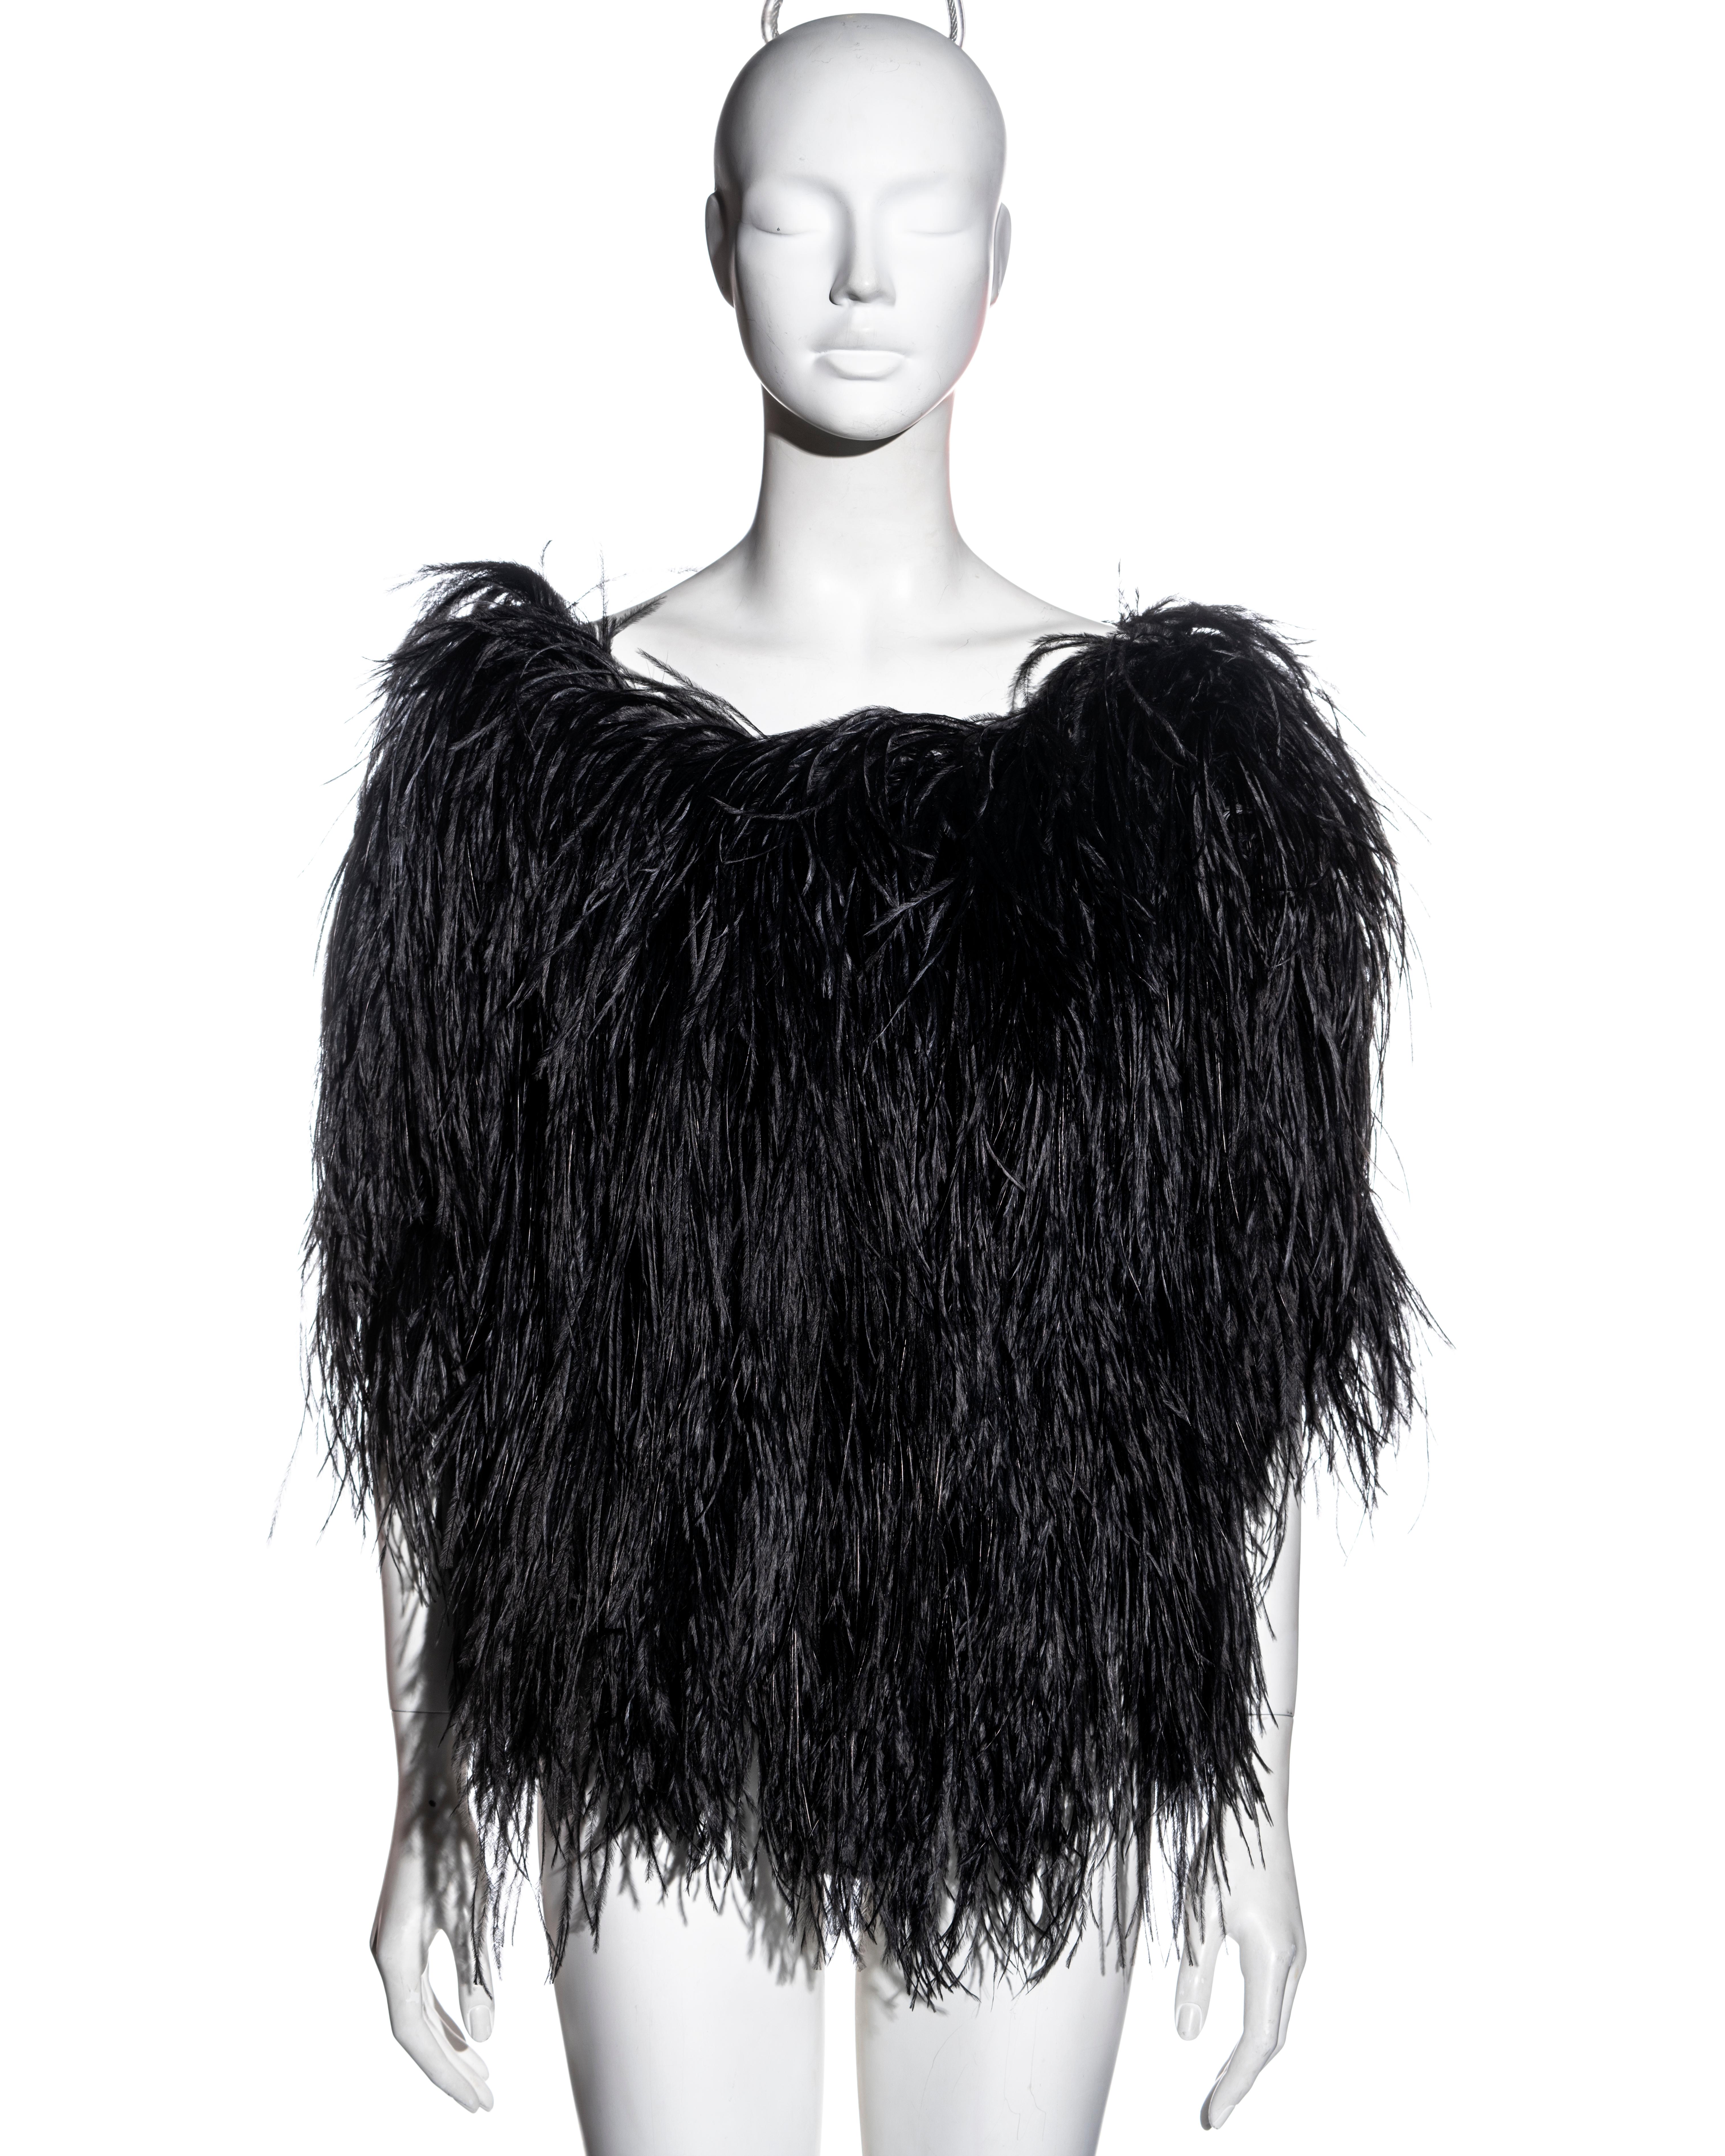 ▪ Yves Saint Laurent black ostrich feather top
▪ Designed by Alber Elbaz
▪ Wide neckline 
▪ Short sleeves
▪ Silk organza lining 
▪ Hidden snap button fastenings at the side seam
▪ Size: Small - Medium
▪ Fall-Winter 1999
▪ 100% Silk
▪ Made in France